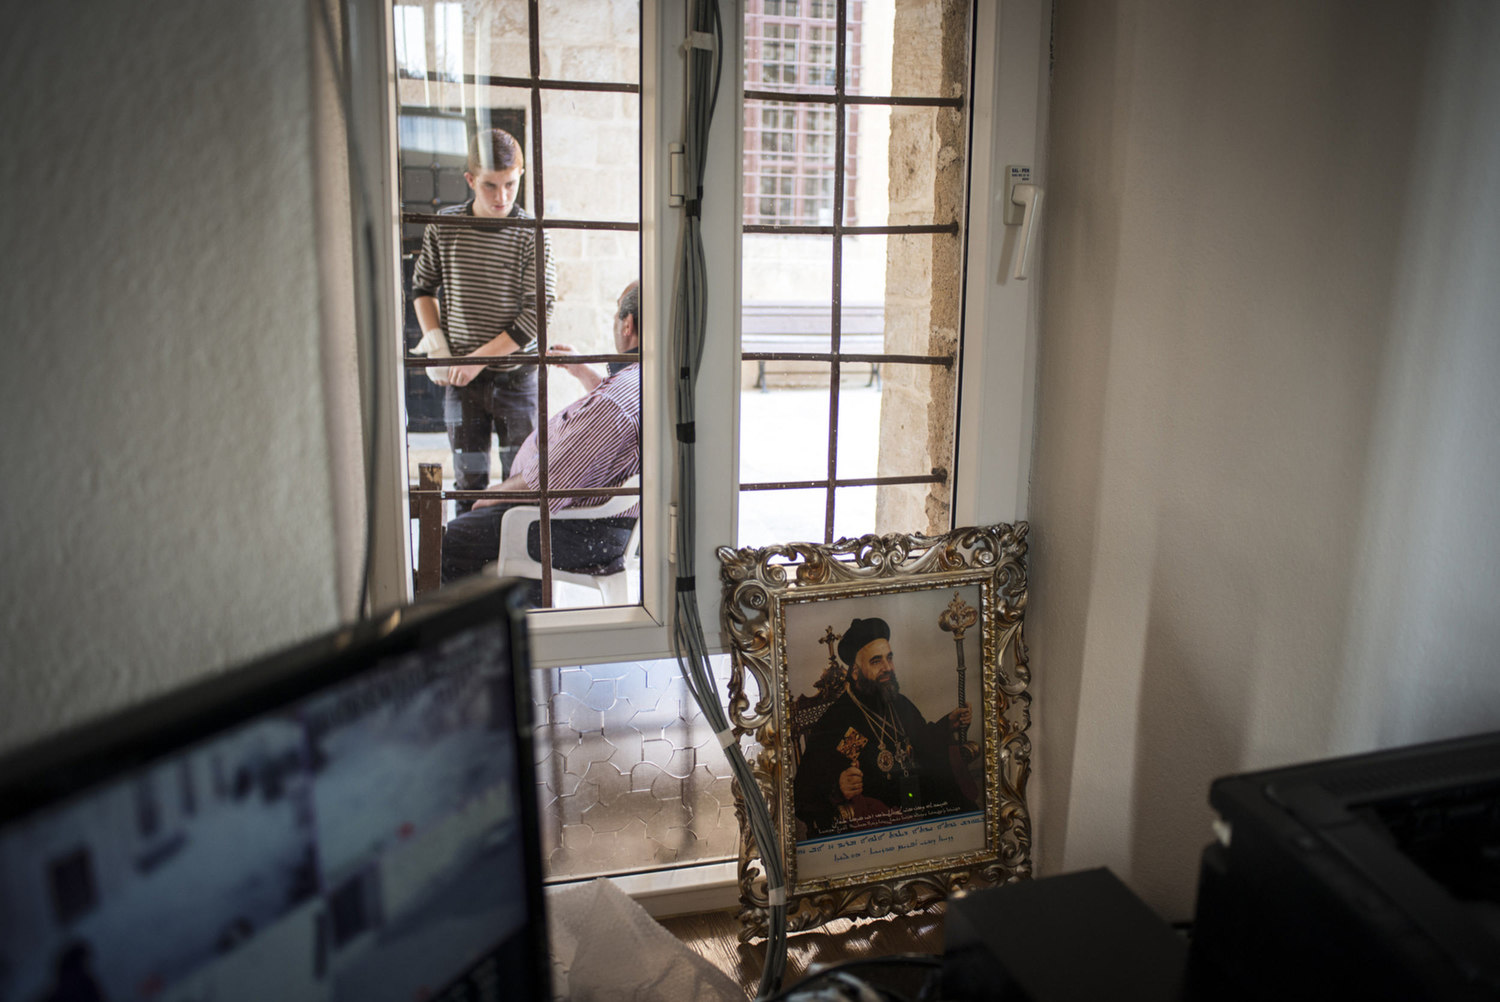  A portrait of a holy figure and CCTV cameras used to monitor the security of the church, where there has been attacks near a window looking out into the courtyard on October 30th, 2014 at Mor Barsaumo church in Midyat, Turkey. 
 